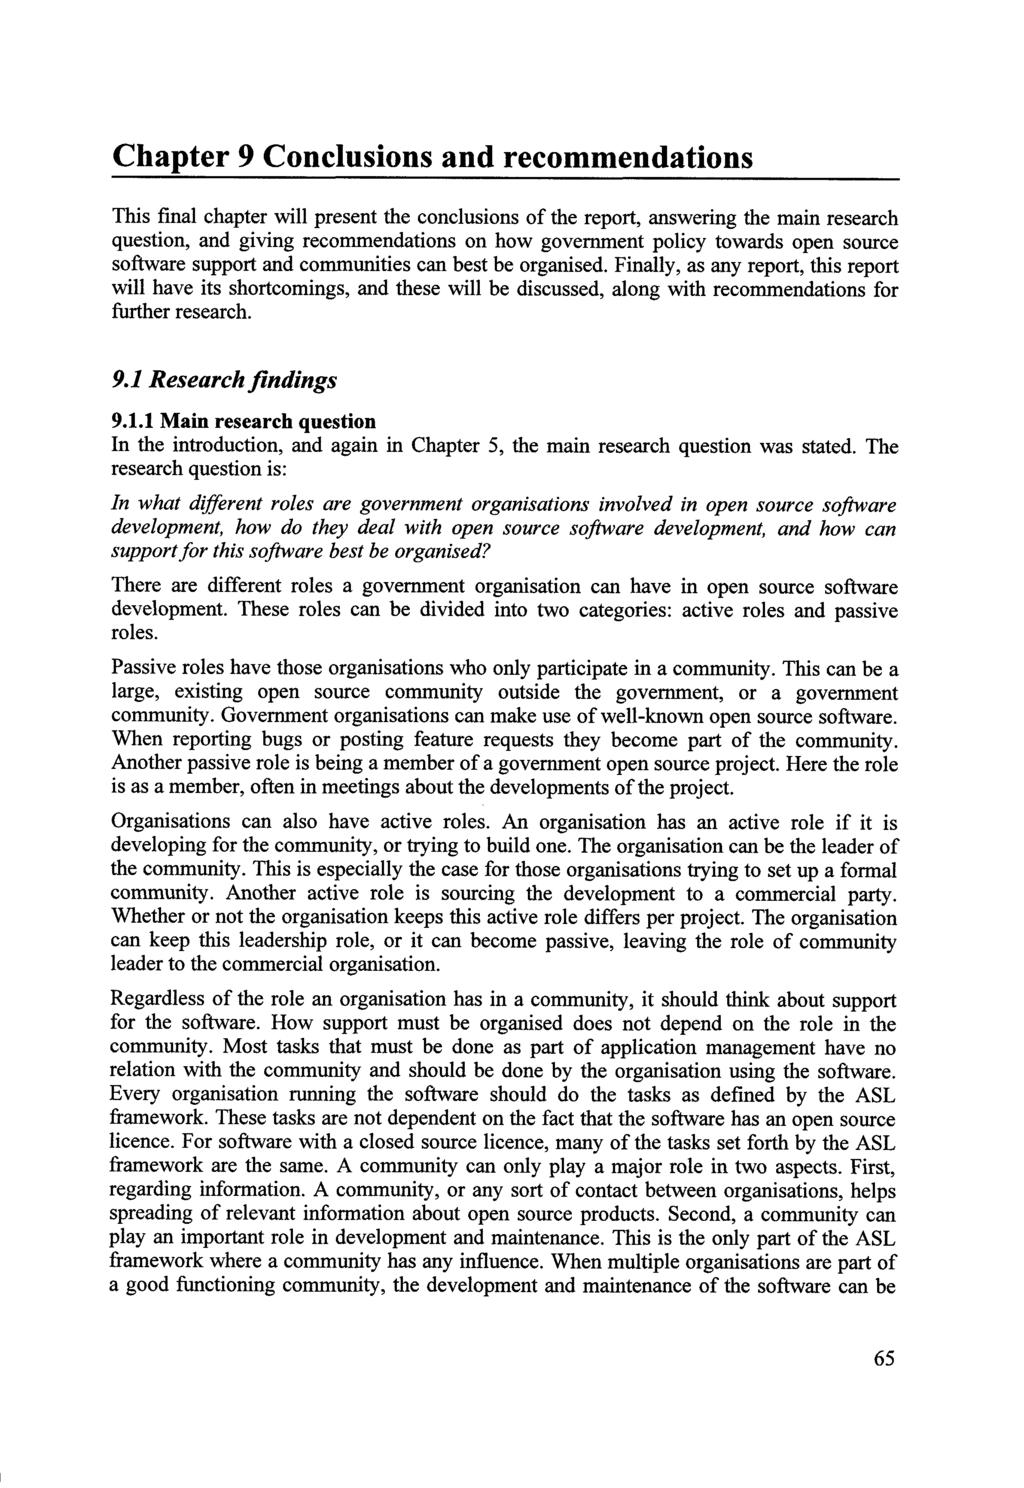 Chapter 9 Conclusions and recommendations This final chapter will present the conclusions of the report, answering the main research question, and giving recommendations on how government policy